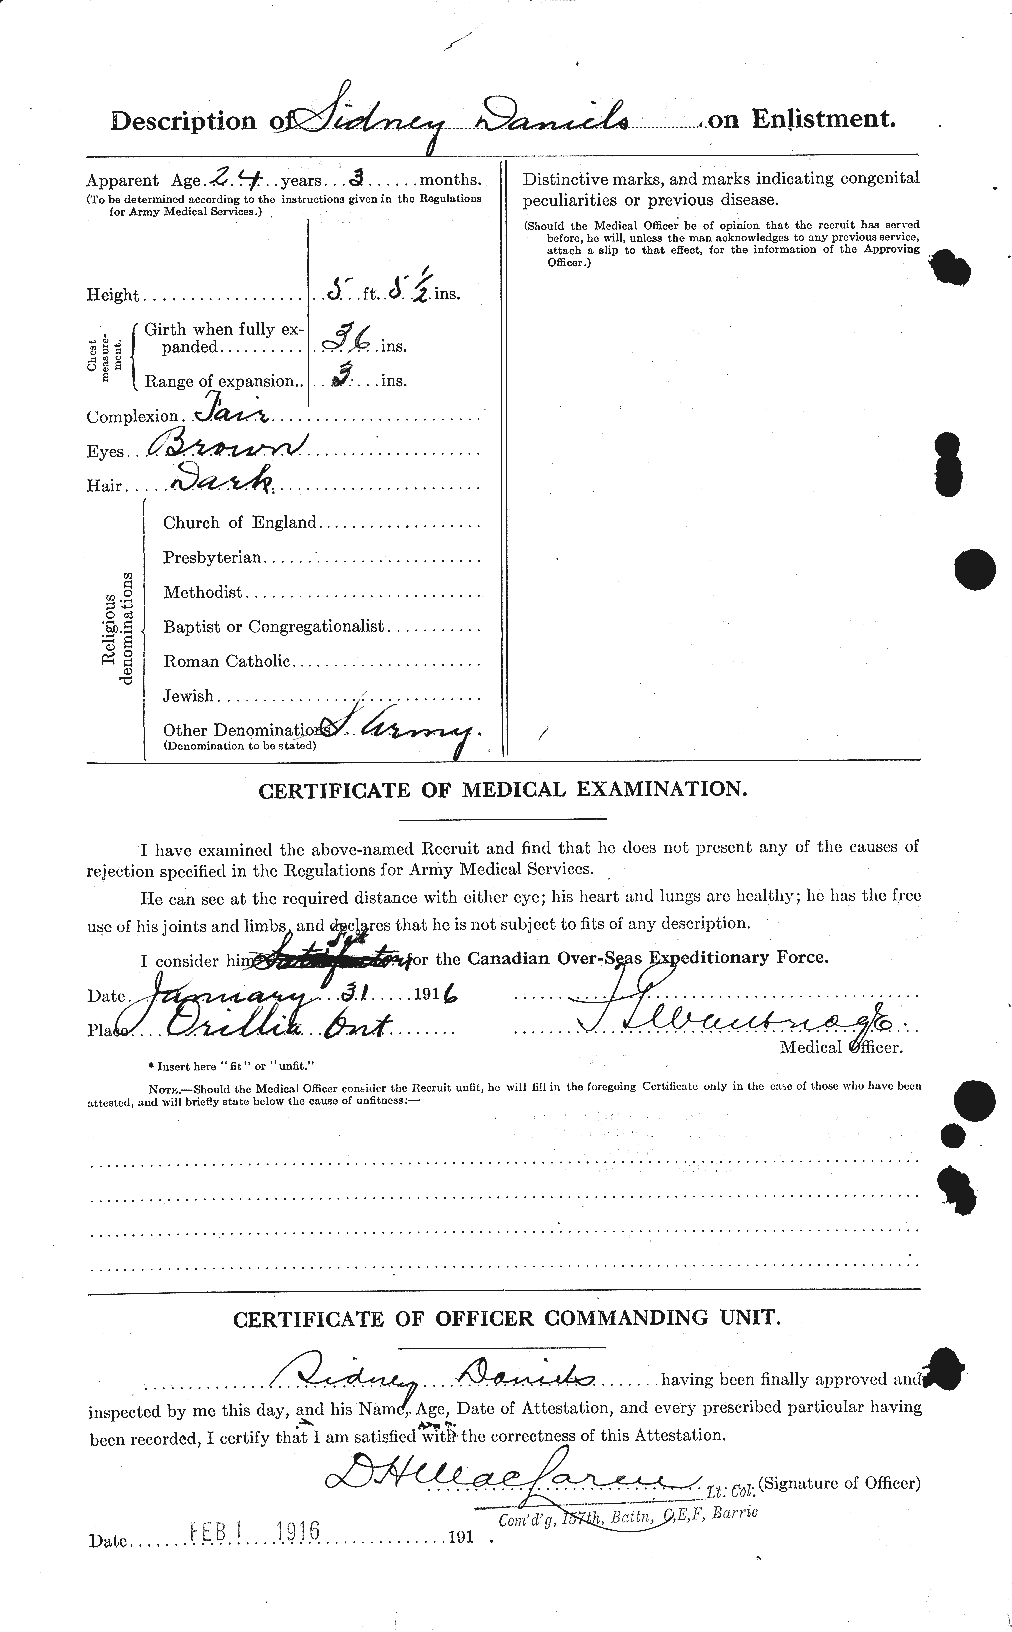 Personnel Records of the First World War - CEF 279671b